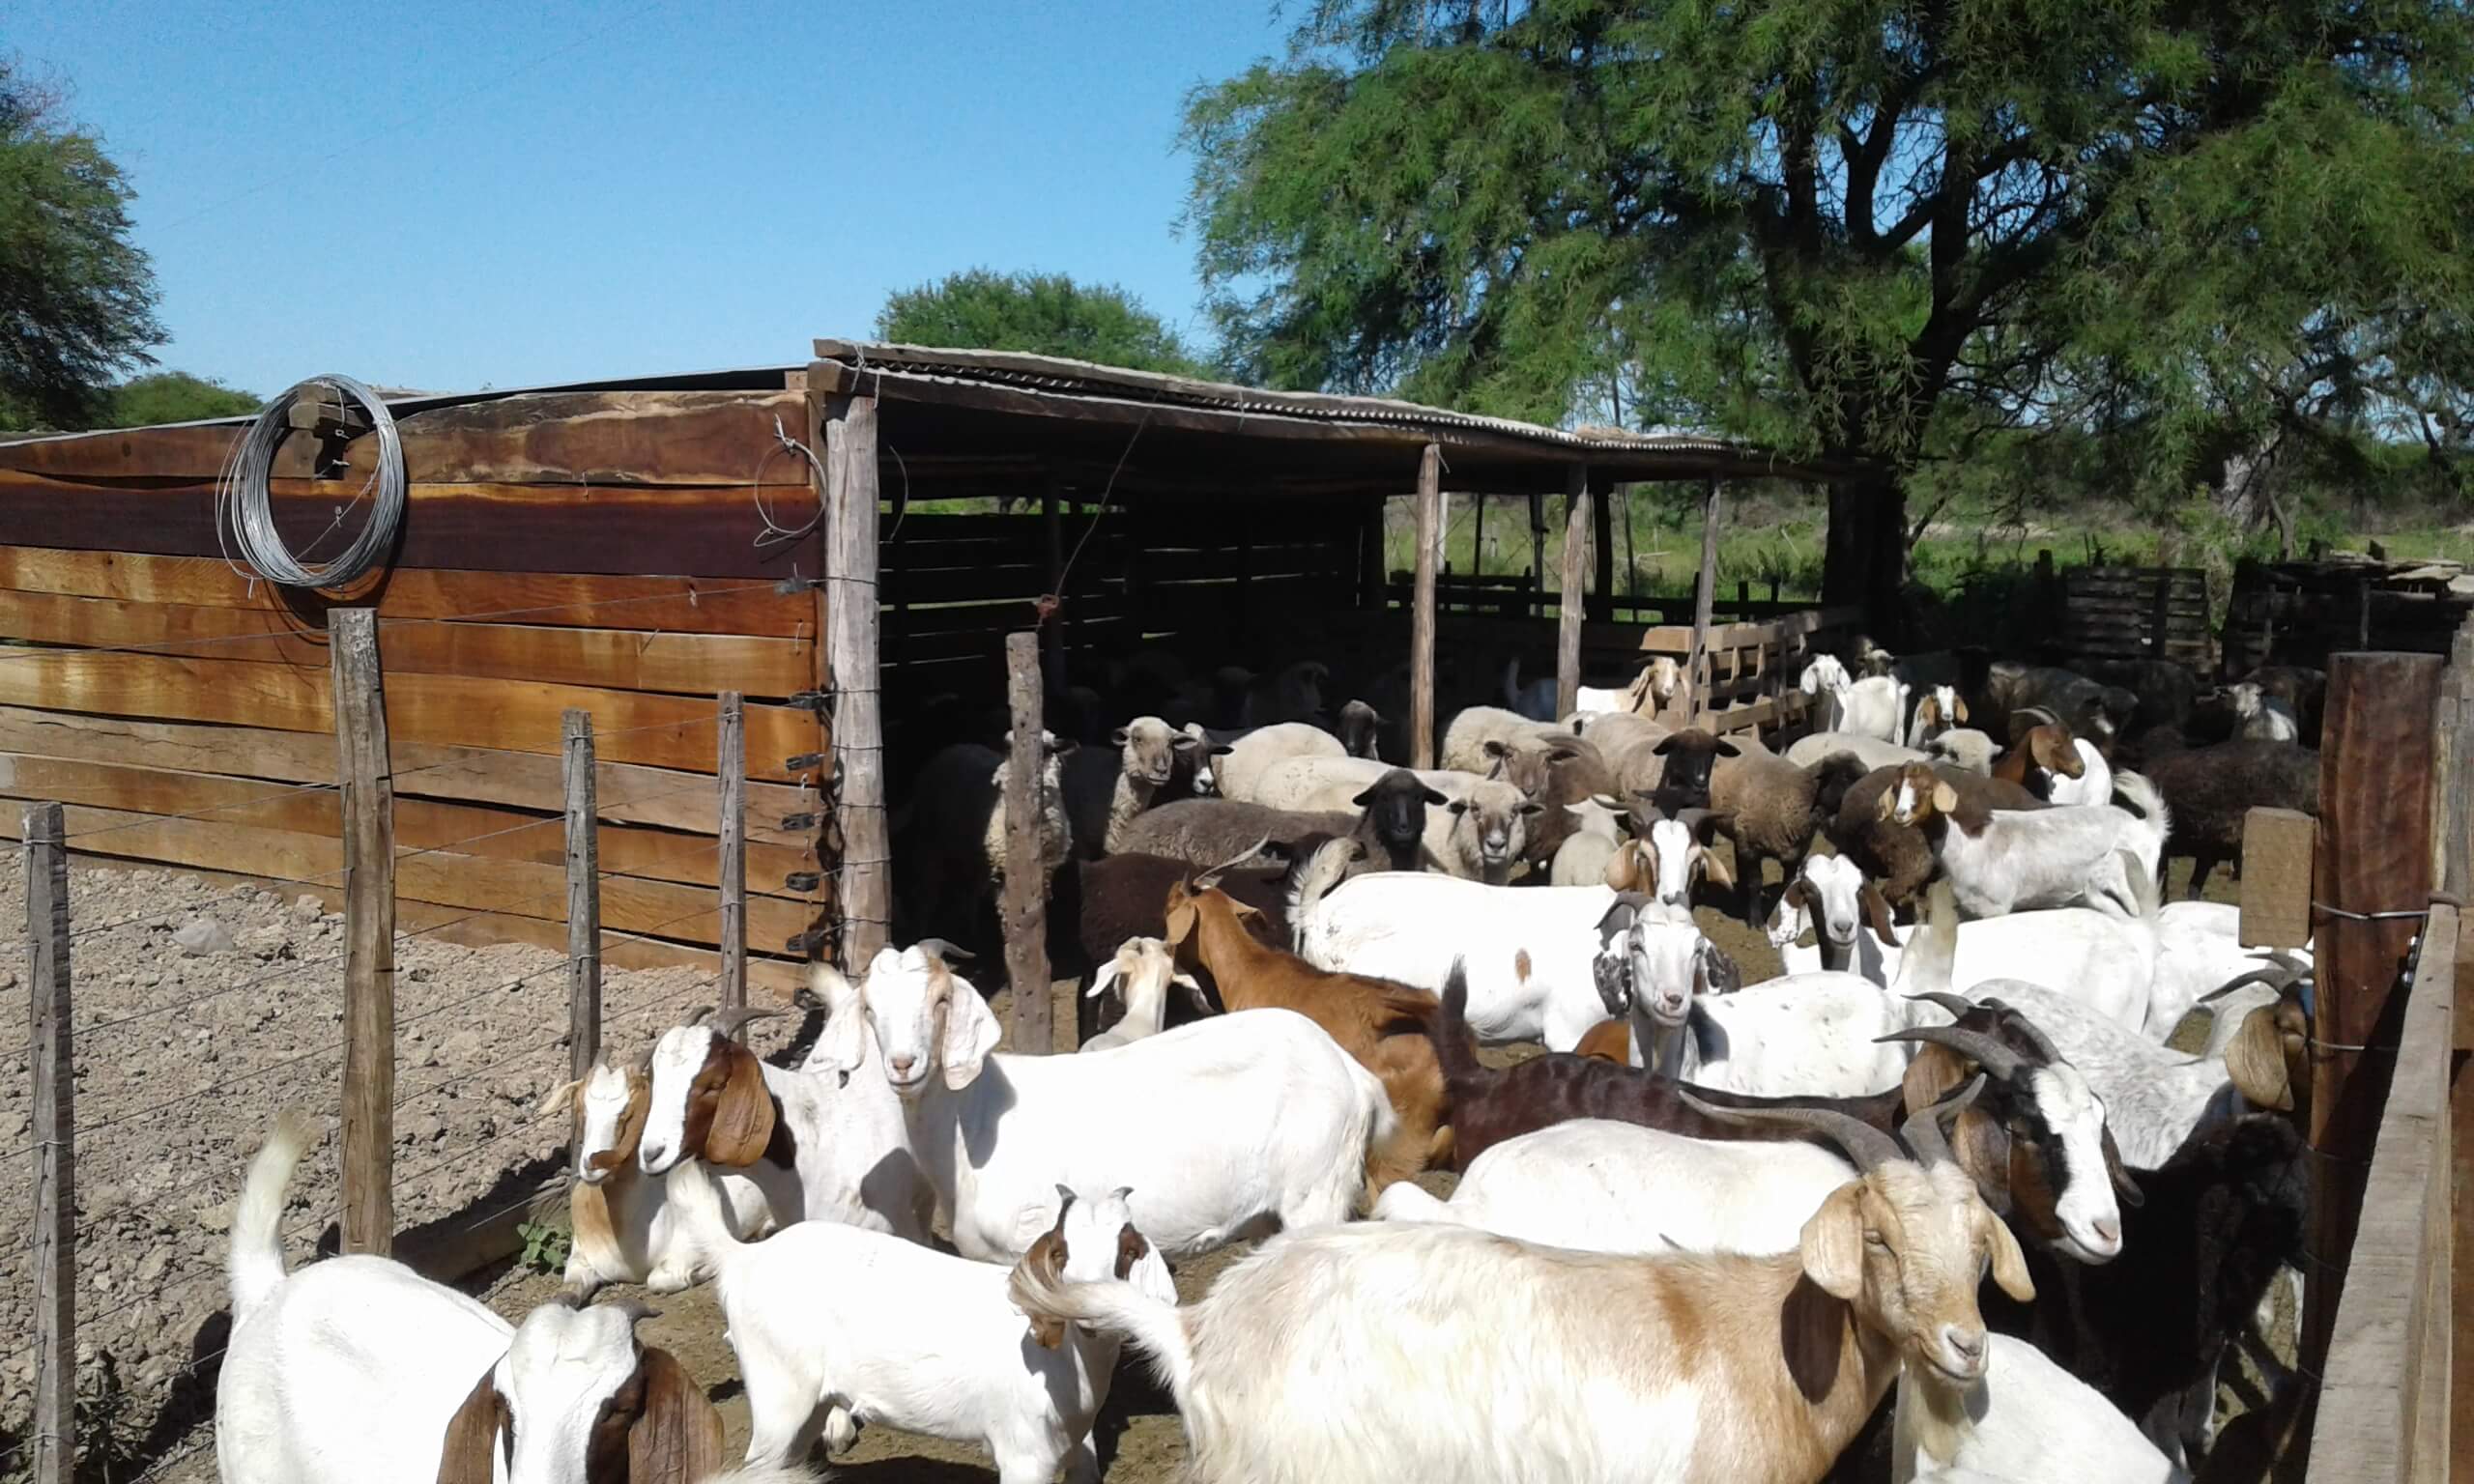 Livestock farmers in Cuba are trained for a sustainable future